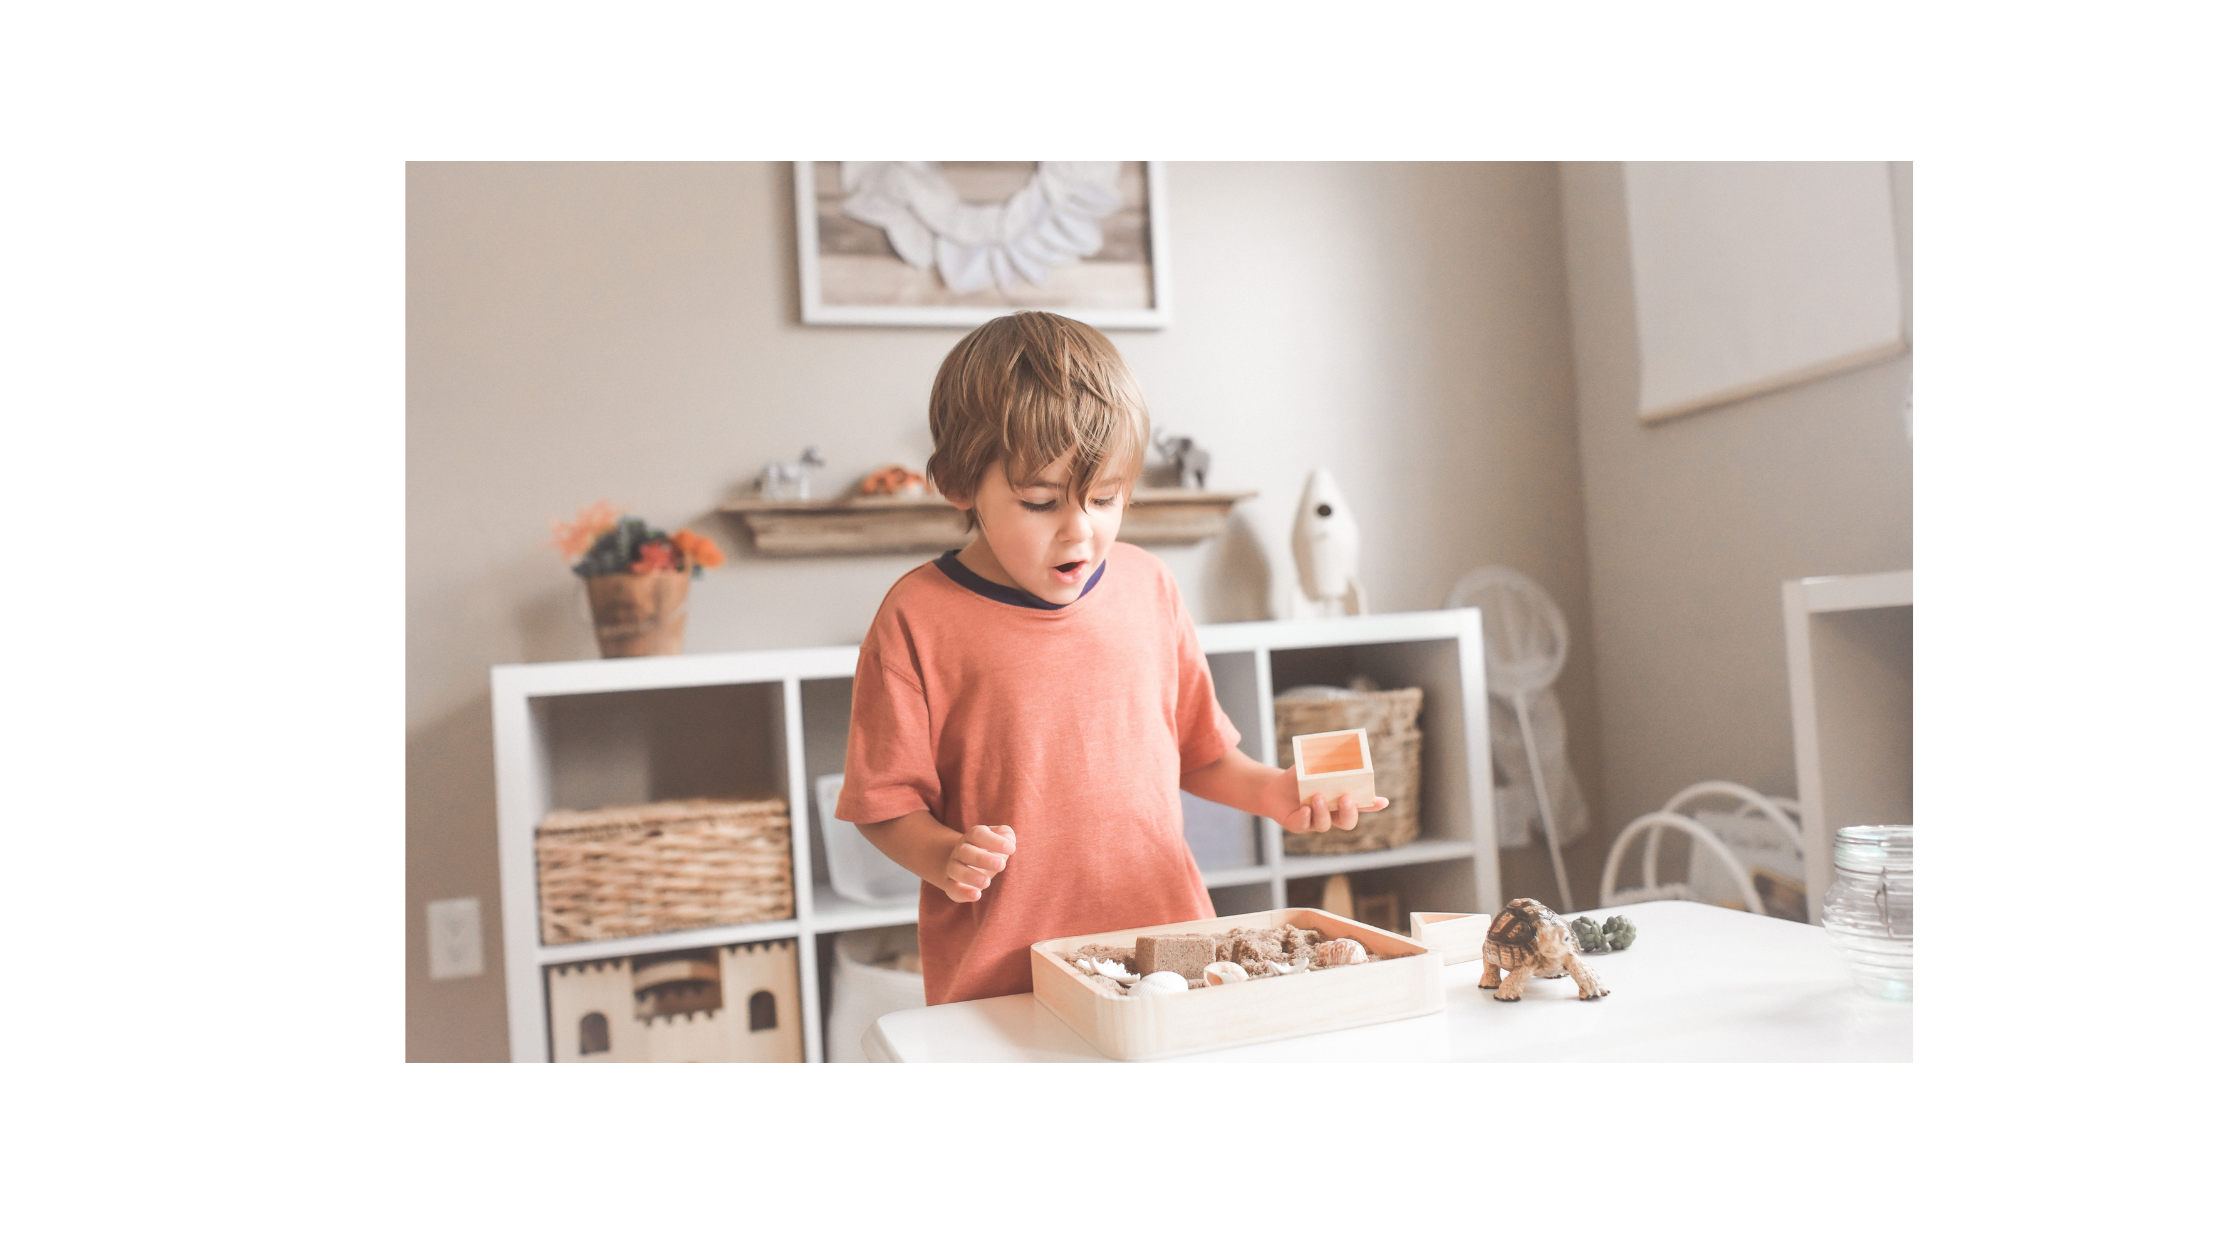  A Montessori home environment can help your child find a sense of independence in a child-friendly space. 